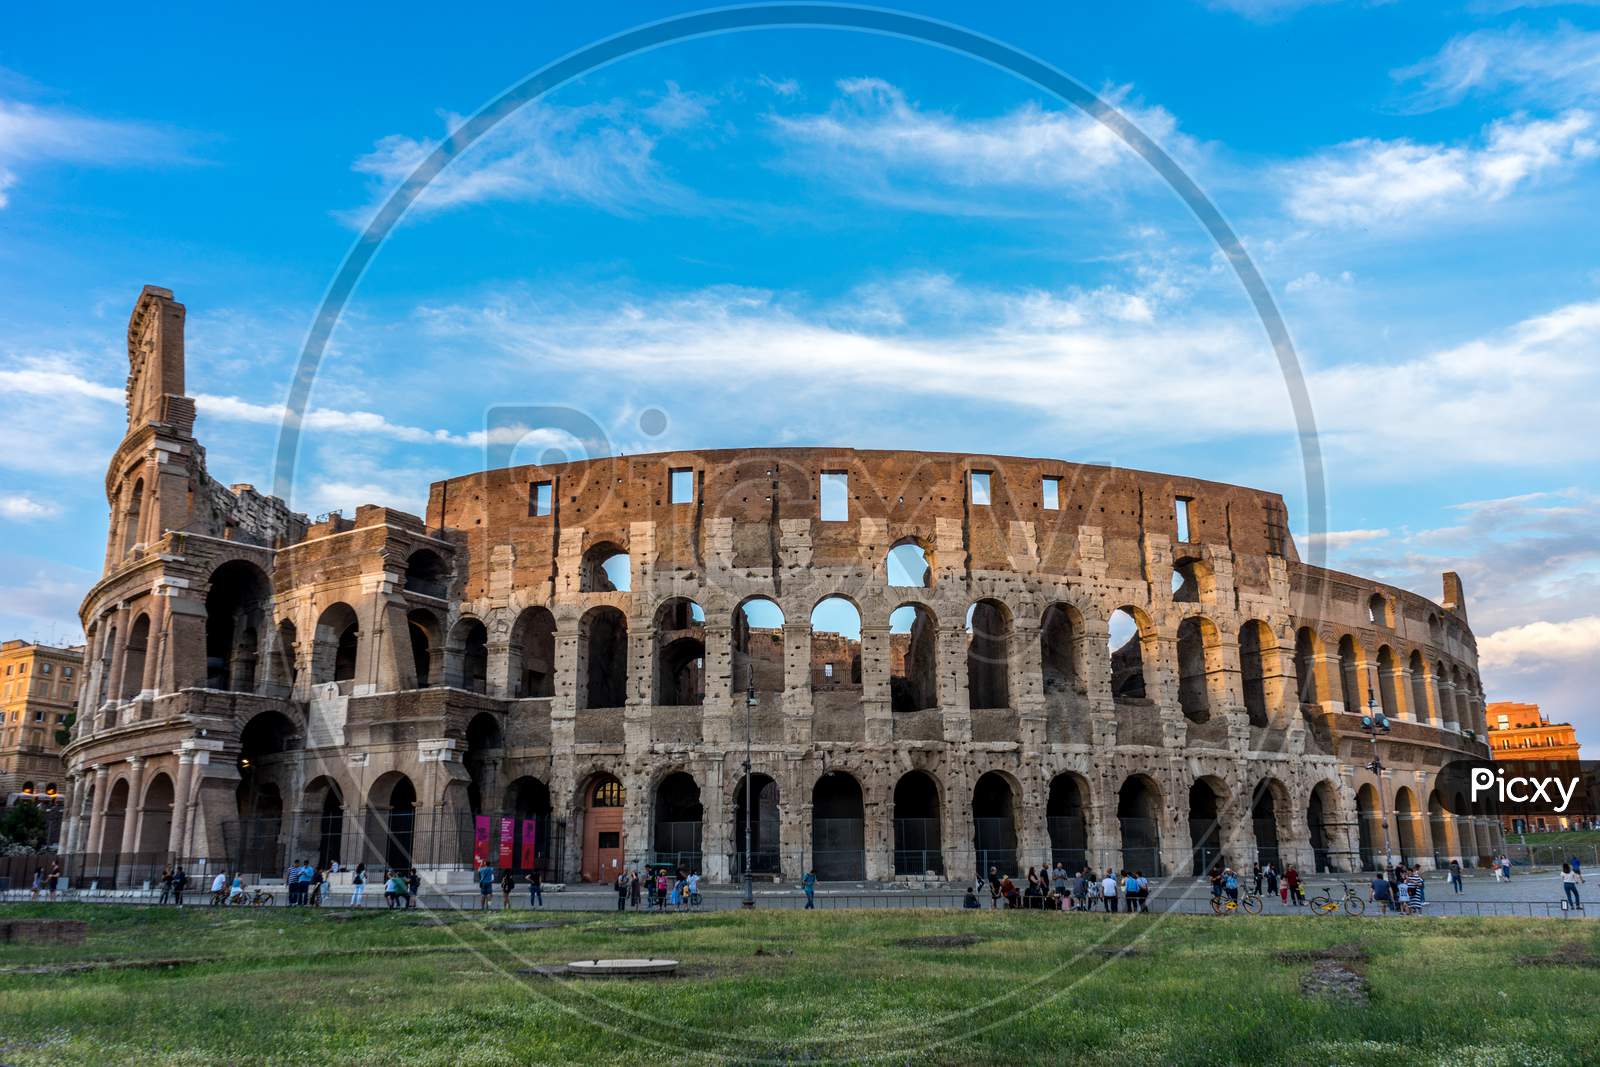 Rome, Italy - 24 June 2018: Golden Sunset At The Great Roman Colosseum (Coliseum, Colosseo), Also Known As The Flavian Amphitheatre. Famous World Landmark. Scenic Urban Landscape.